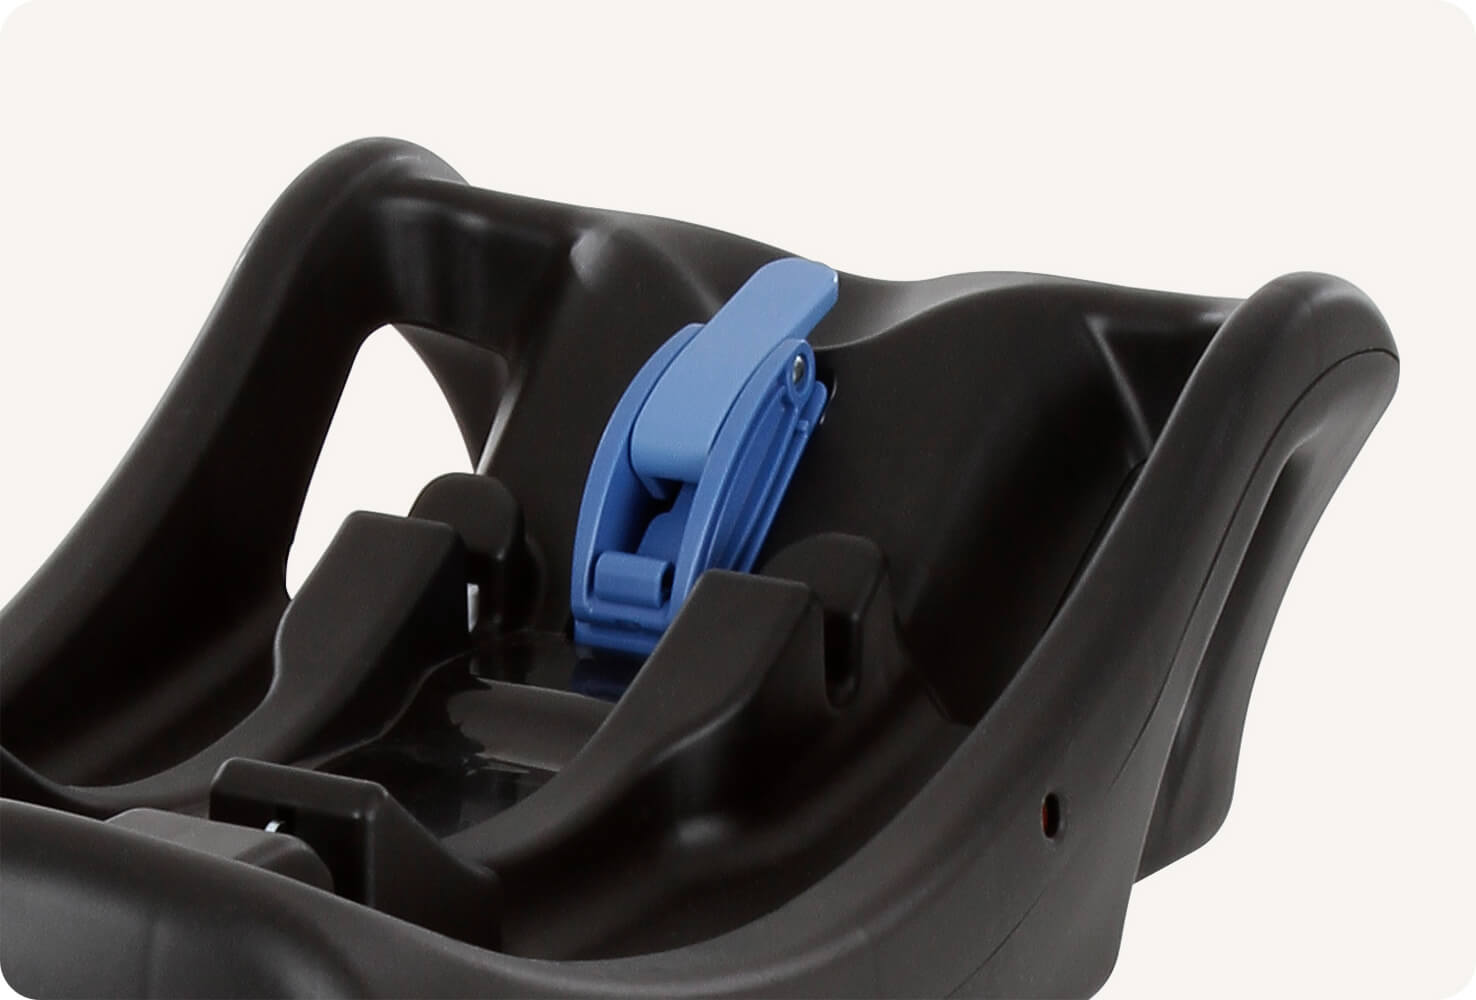  Closeup of the vehicle belt lockoff device on Joie’s clickFIT car seat base.